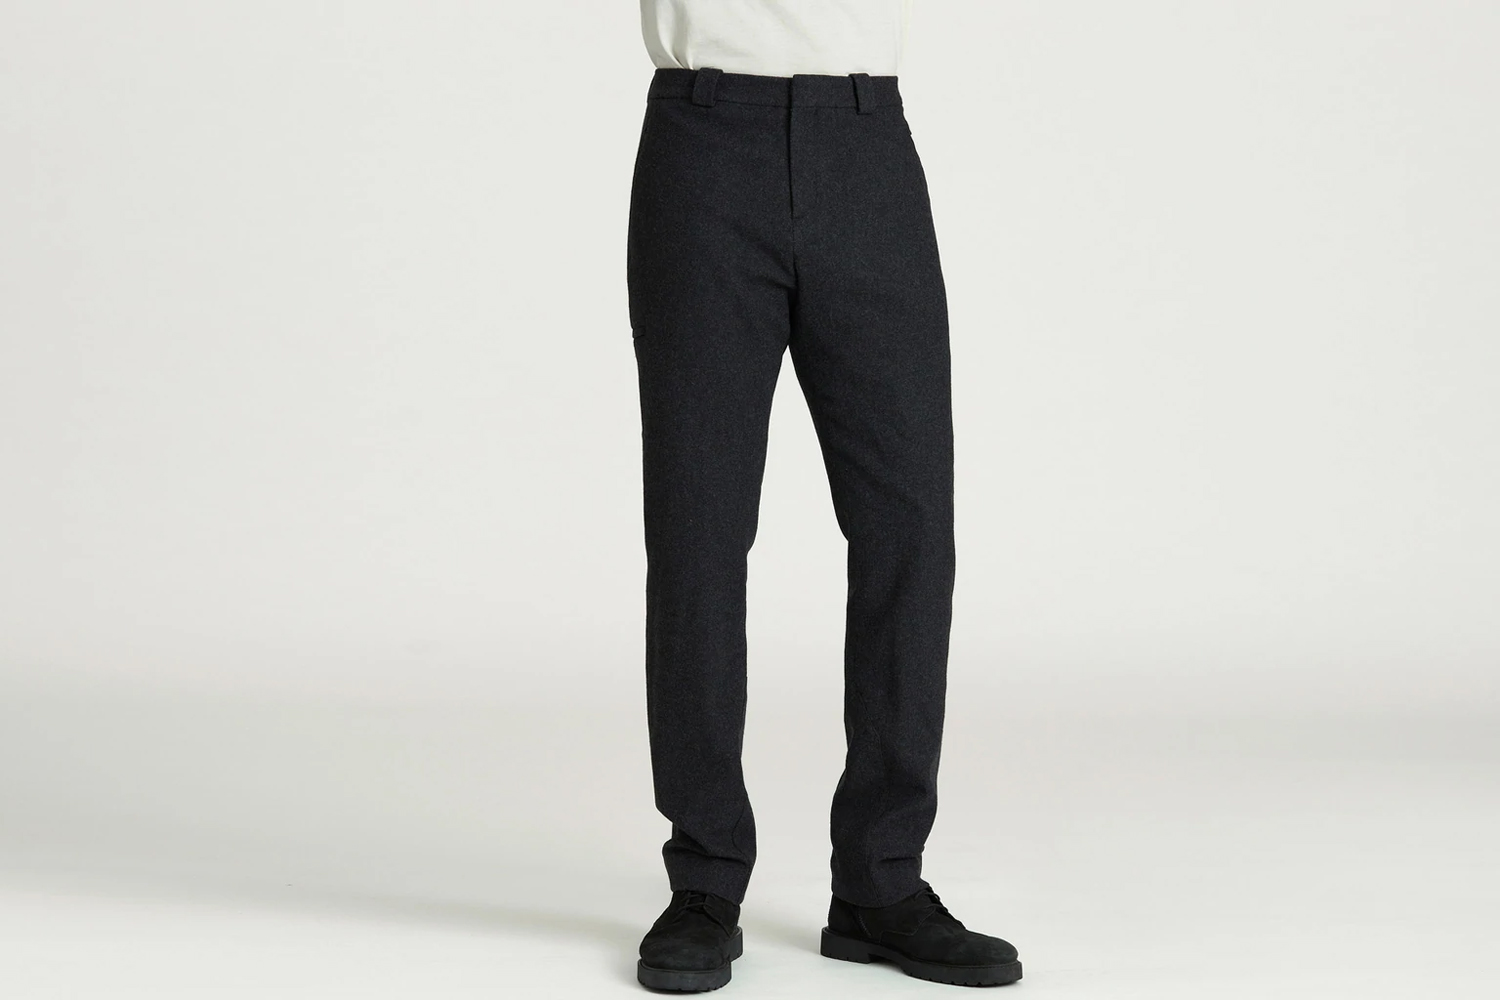 Aether Verden Wool Pant in dark charcoal coloring